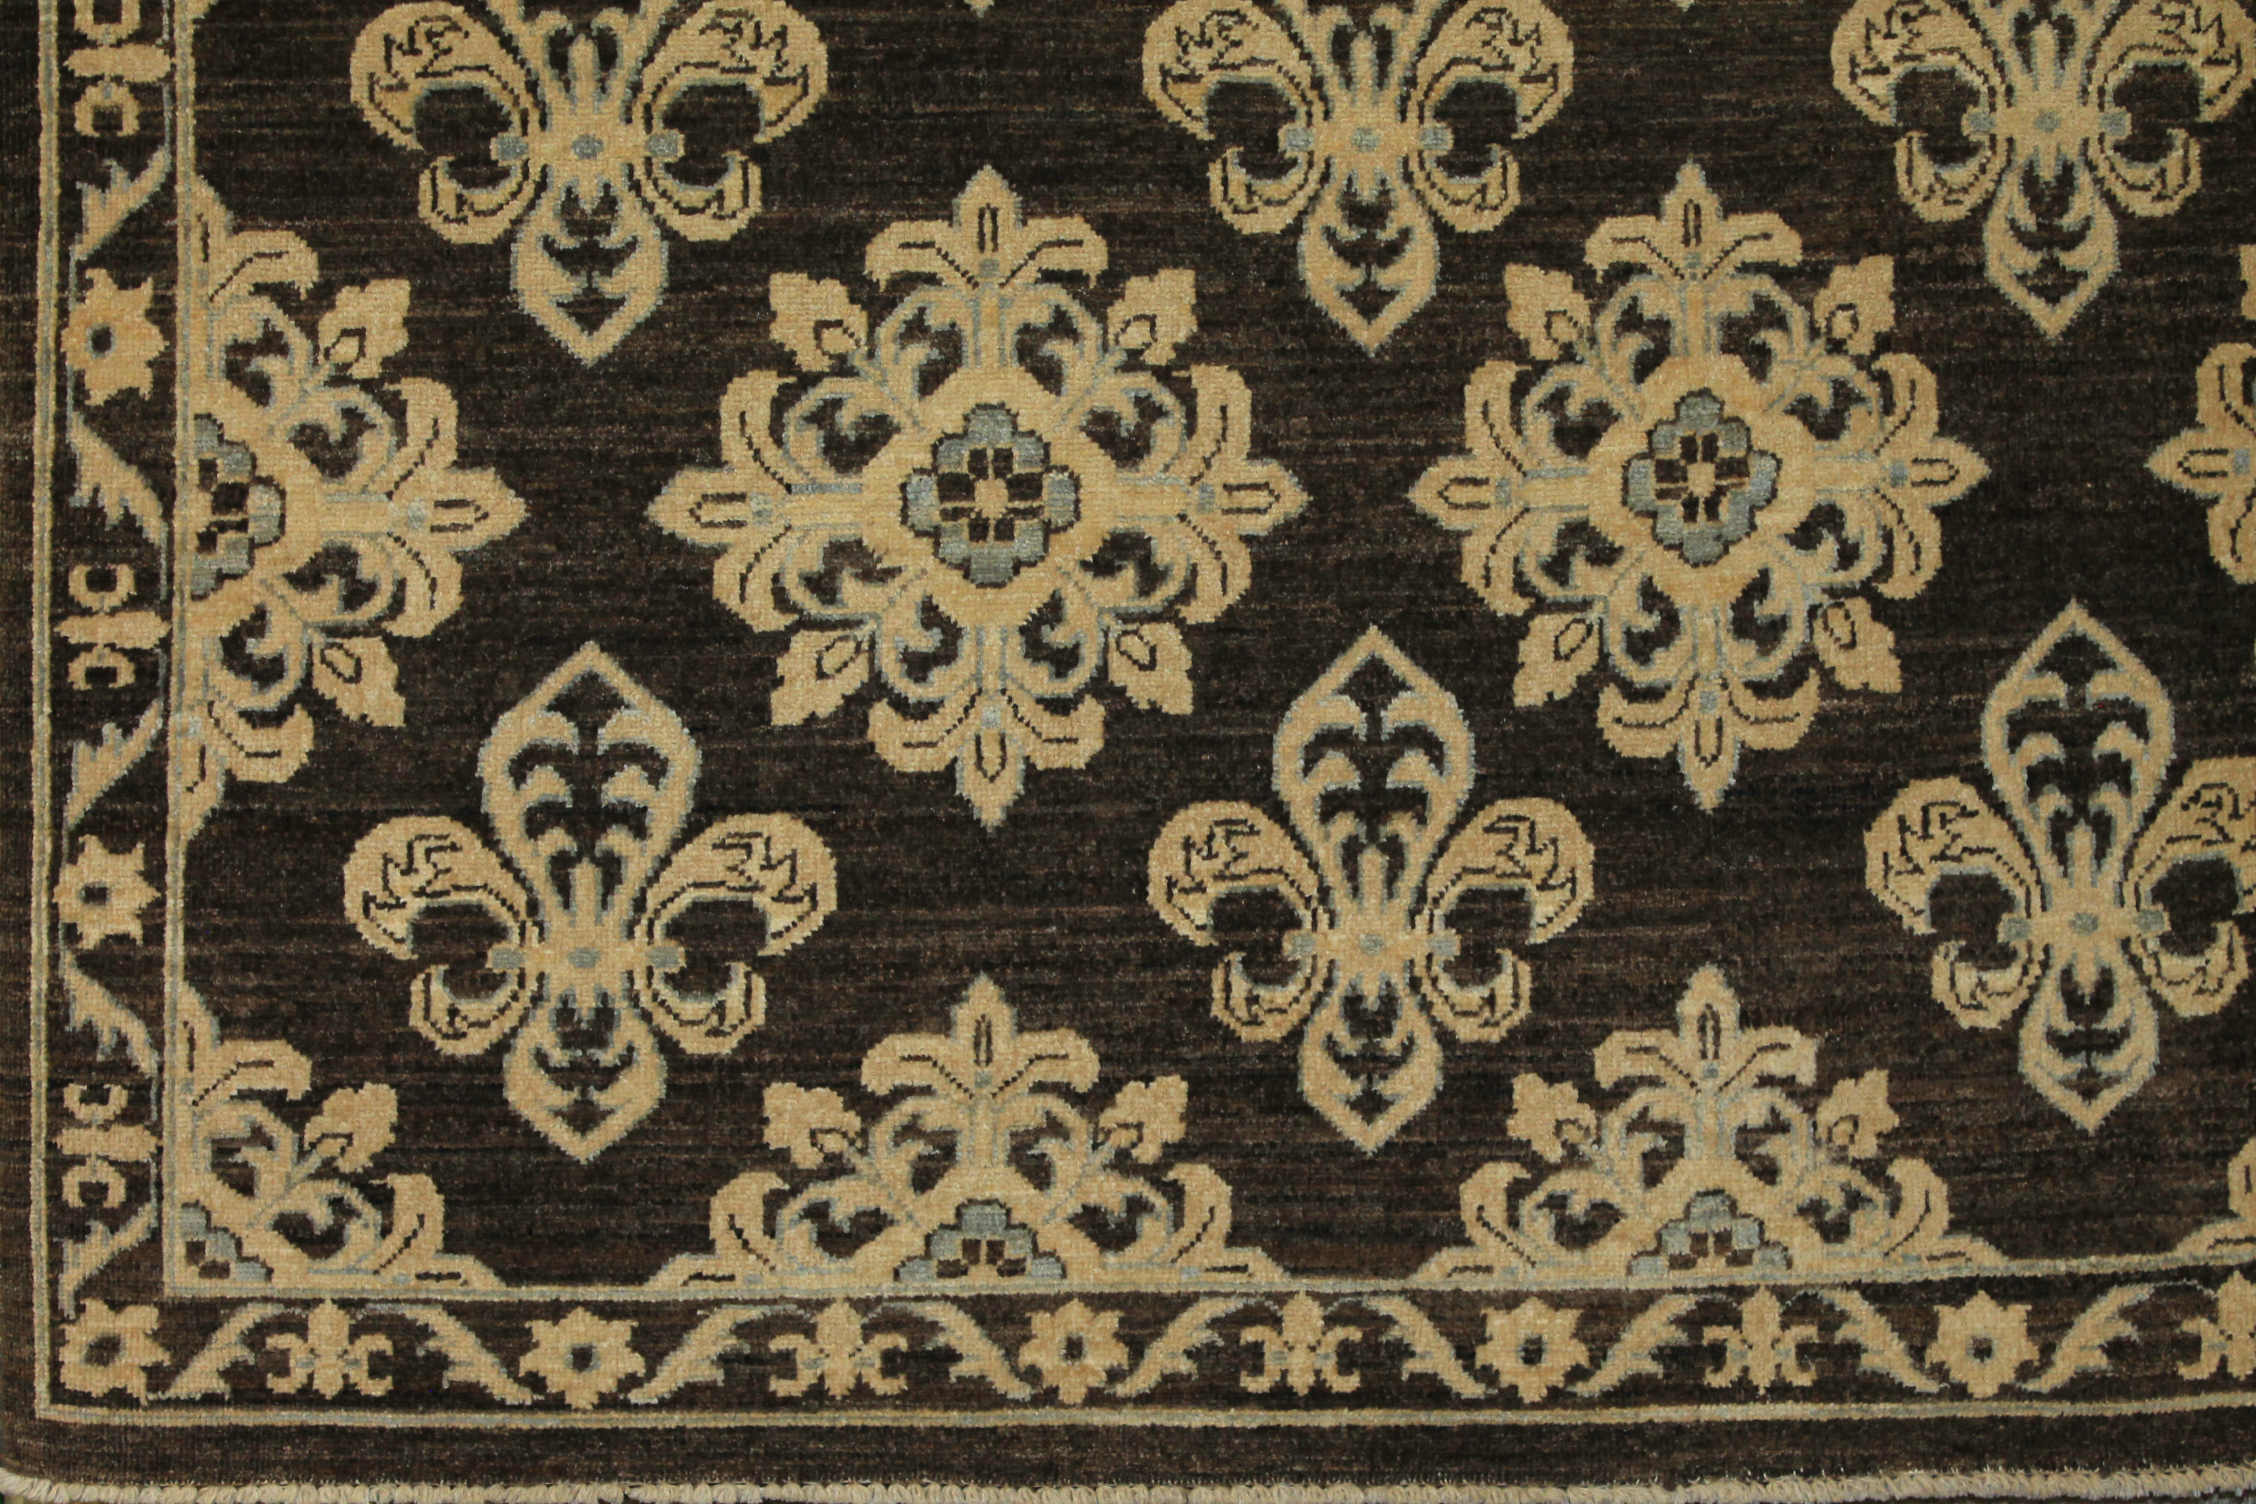 Clearance & Discount Rugs Chobi Oushak Design Hand Knotted Wool Rug 9960 Lt. Brown - Chocolate Hand Knotted Rug